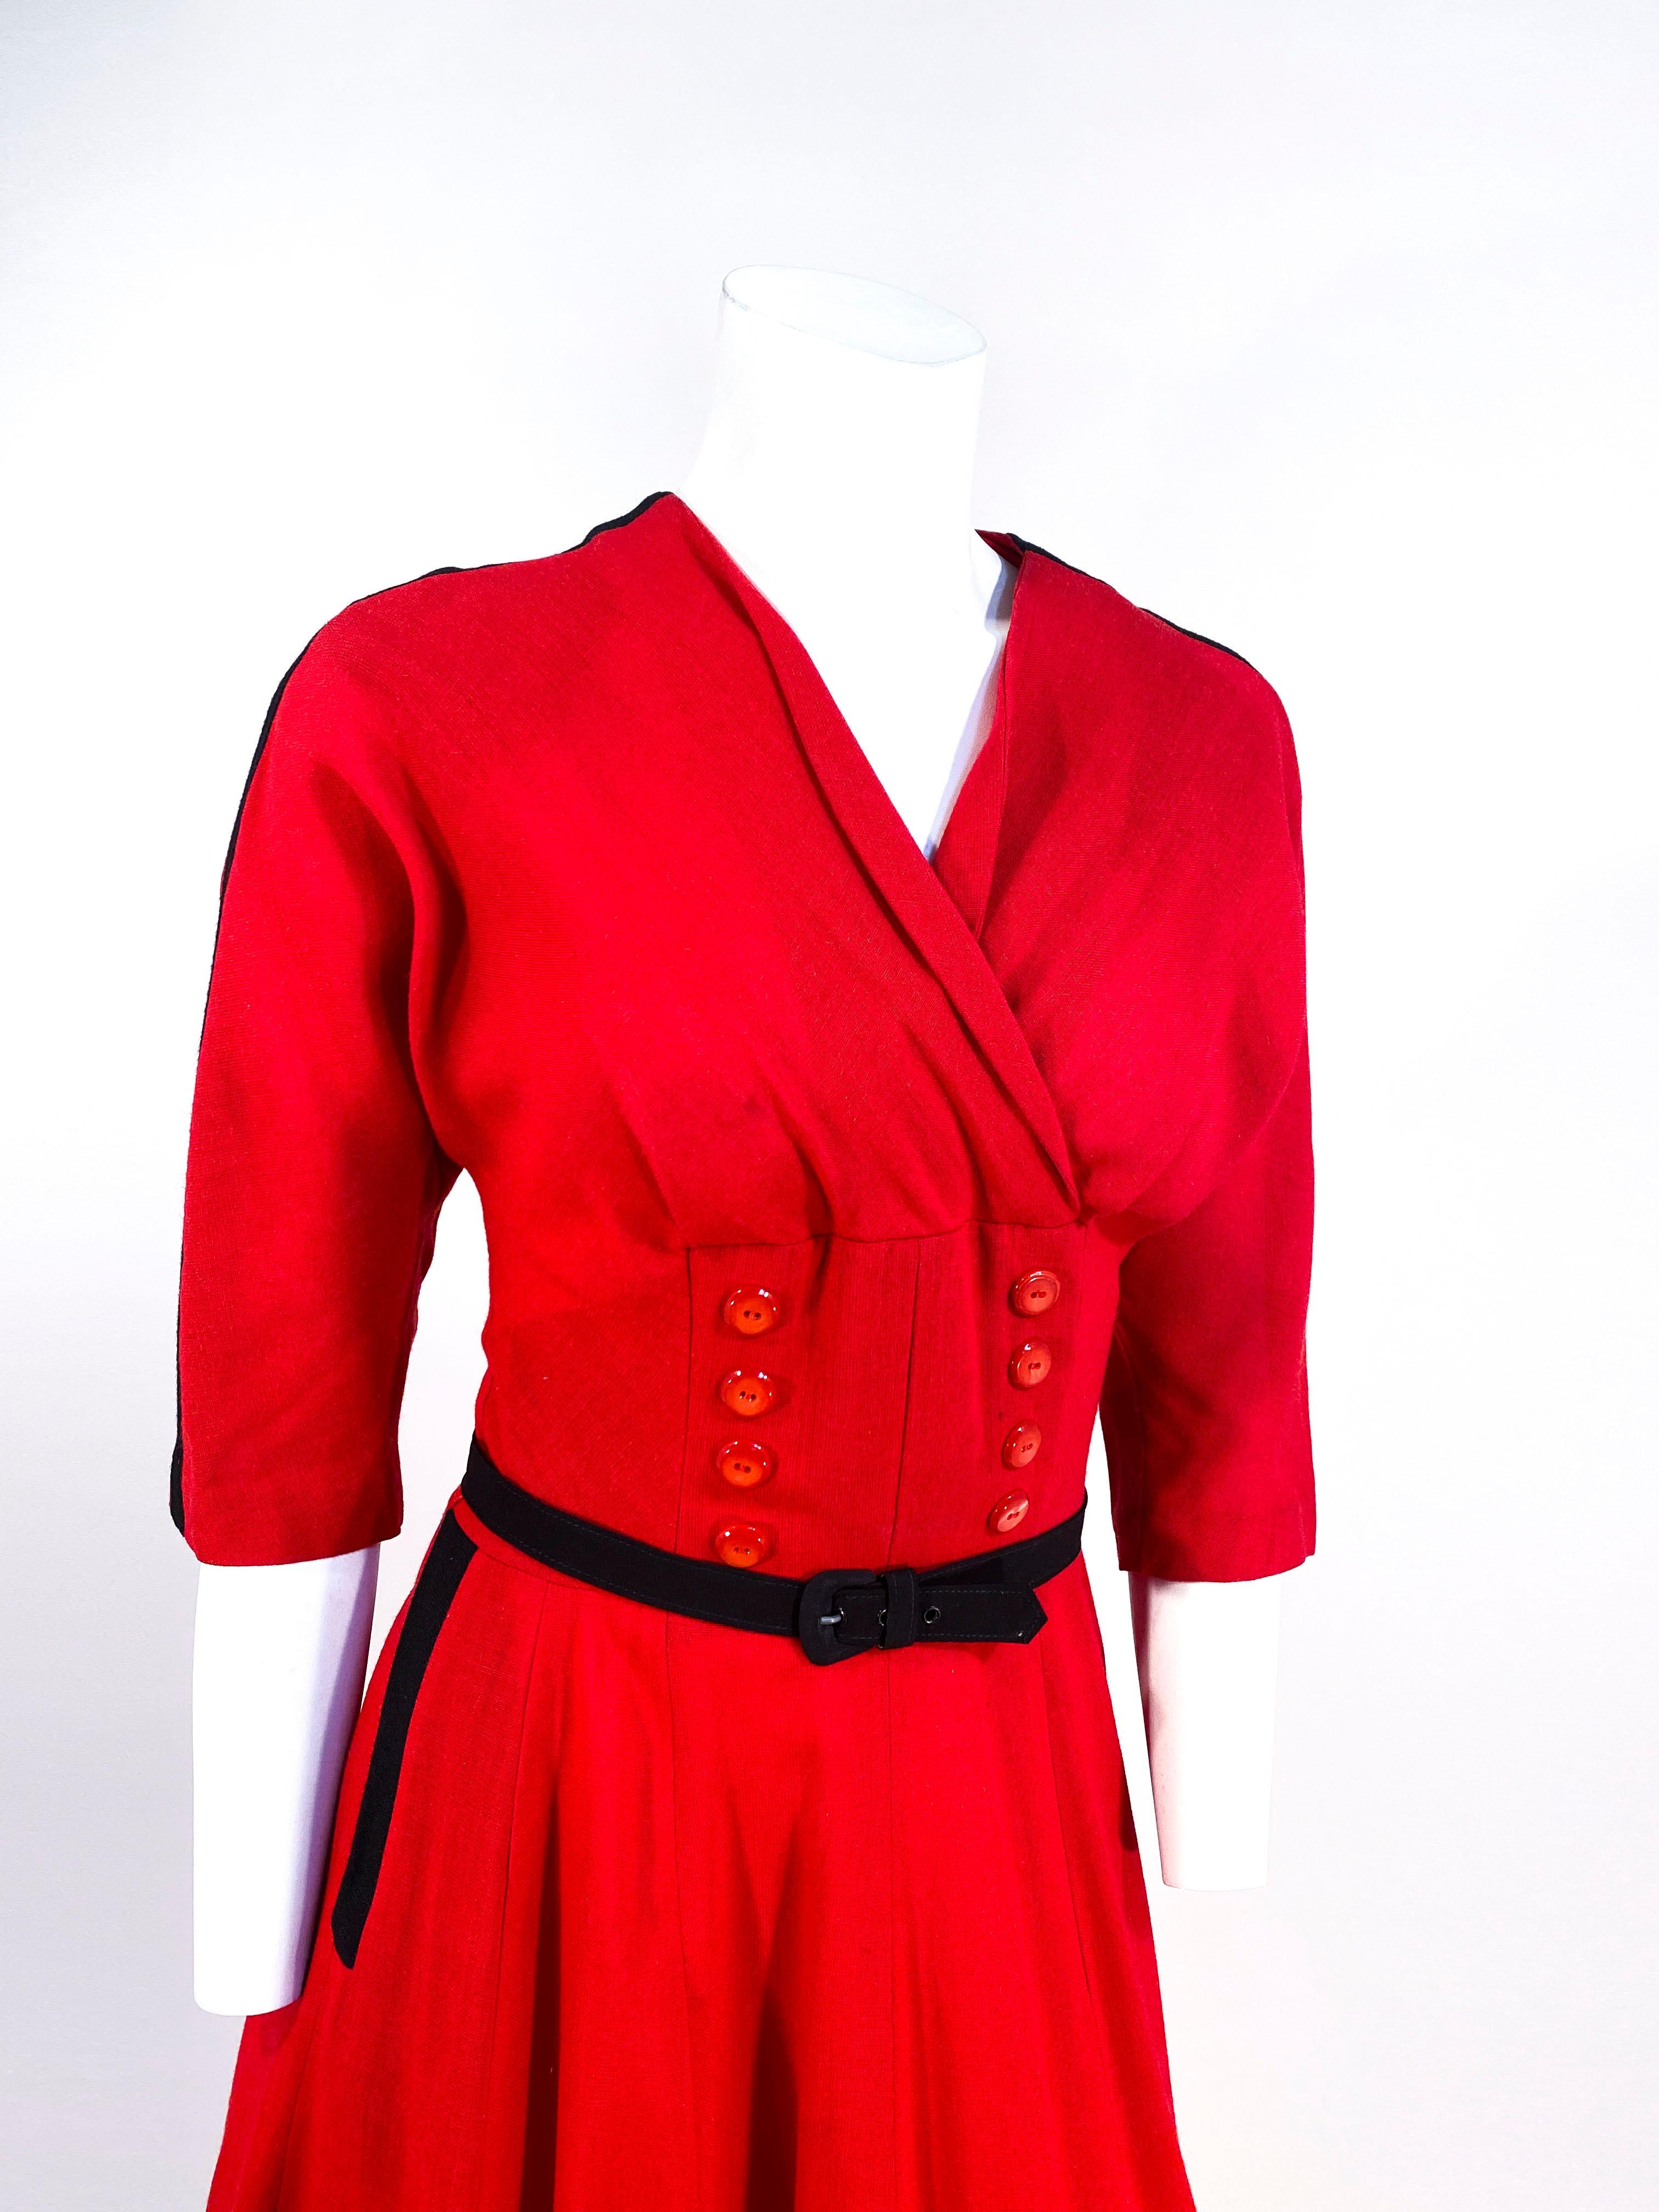 1950s red lightweight wool dress with full skirt, black bordered in-set side pockets, to match the black boarders on the three-fourths Dolman sleeves, and narrow black belt. The bodice is a gathered cross-over v-neck over a buttoned decorative